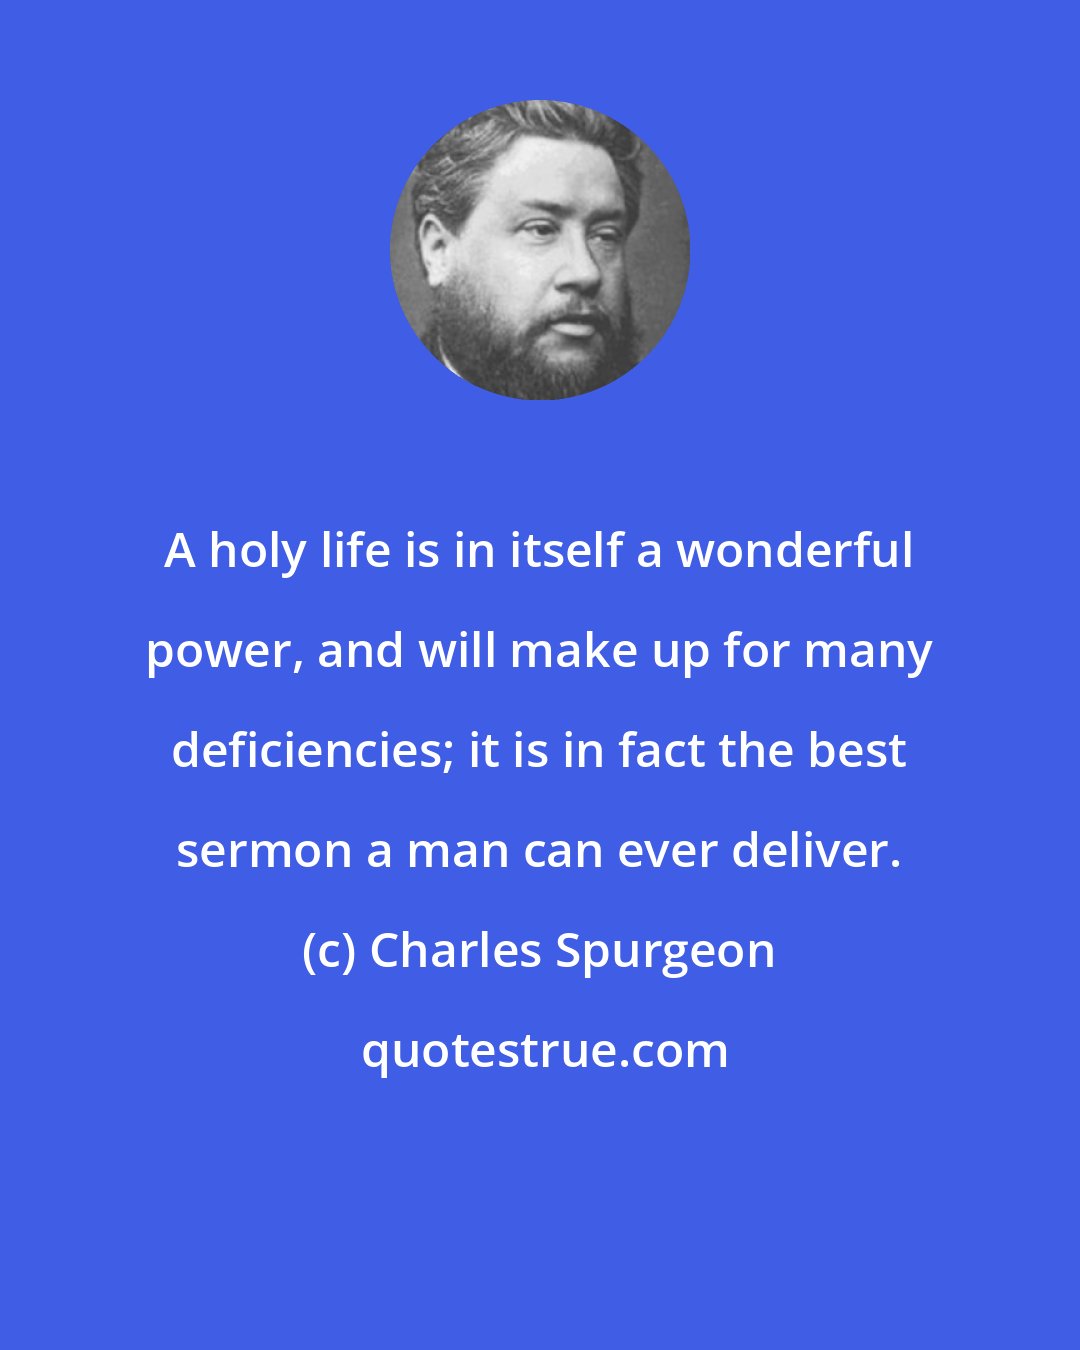 Charles Spurgeon: A holy life is in itself a wonderful power, and will make up for many deficiencies; it is in fact the best sermon a man can ever deliver.